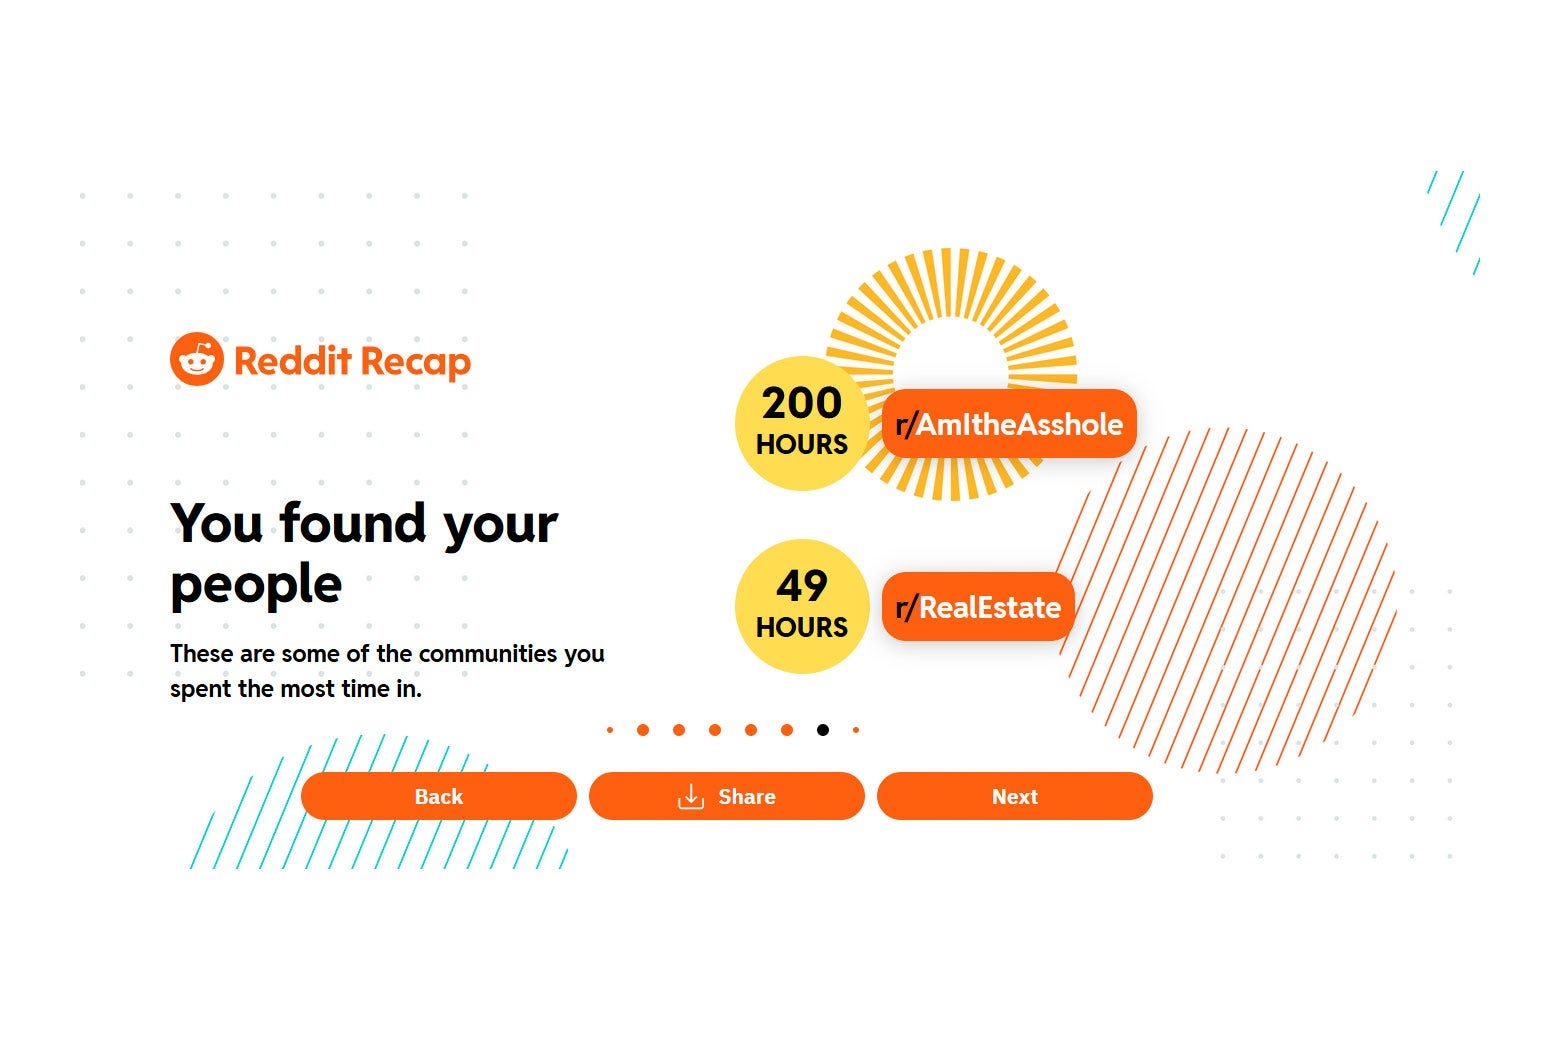 A screenshot says: "You found your people. These are some of the communities you spent the most time in. 200 hours: r/AmITheAsshole. 49 hours: r/RealEstate."